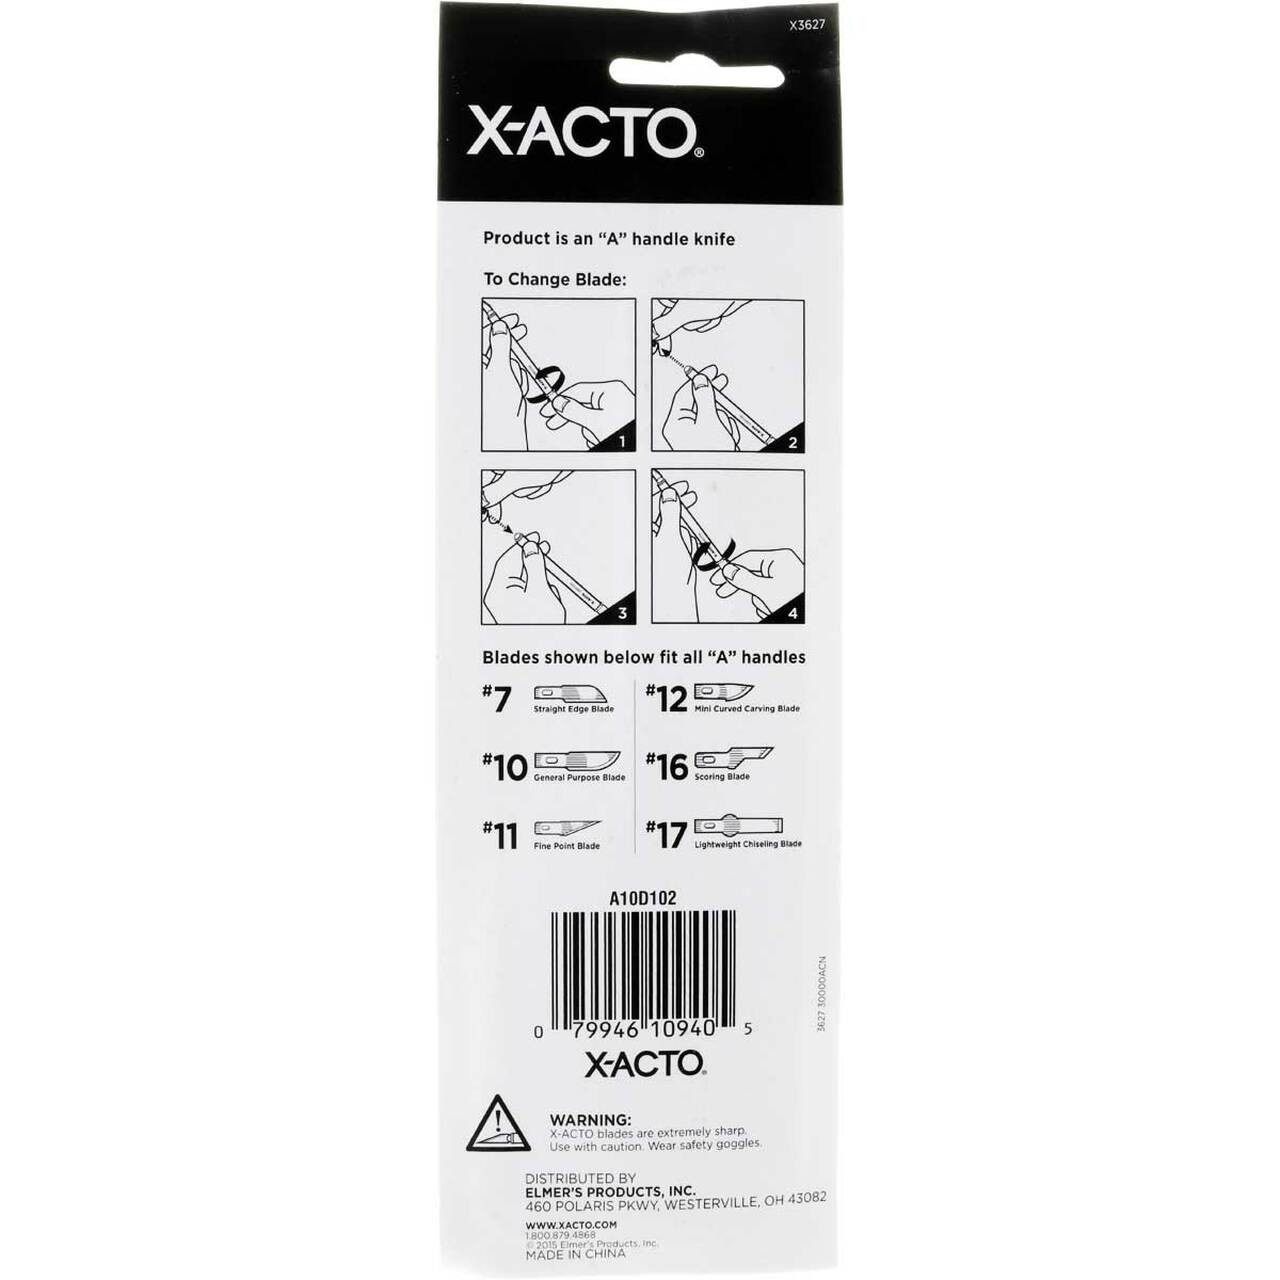 X-ACTO® Gripster® Knife